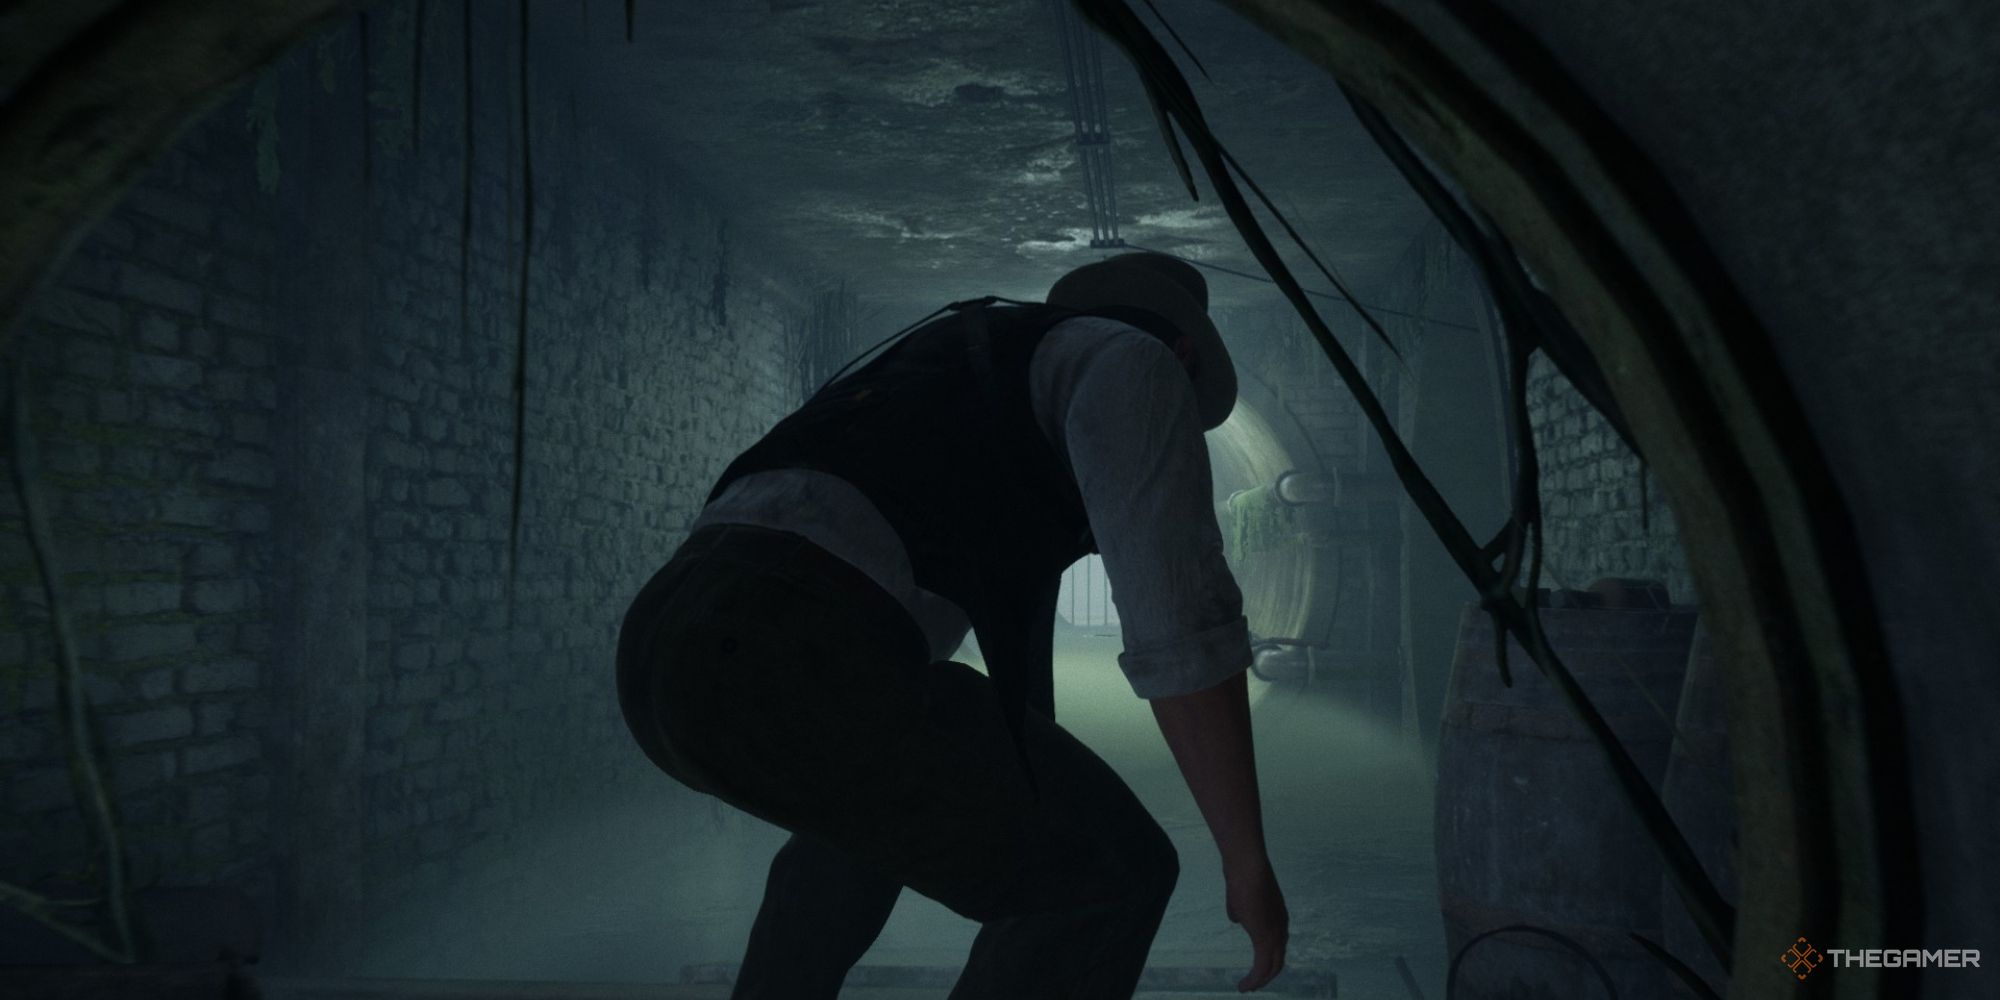 Alone In The Dark, Edward Crouching Through Sewers